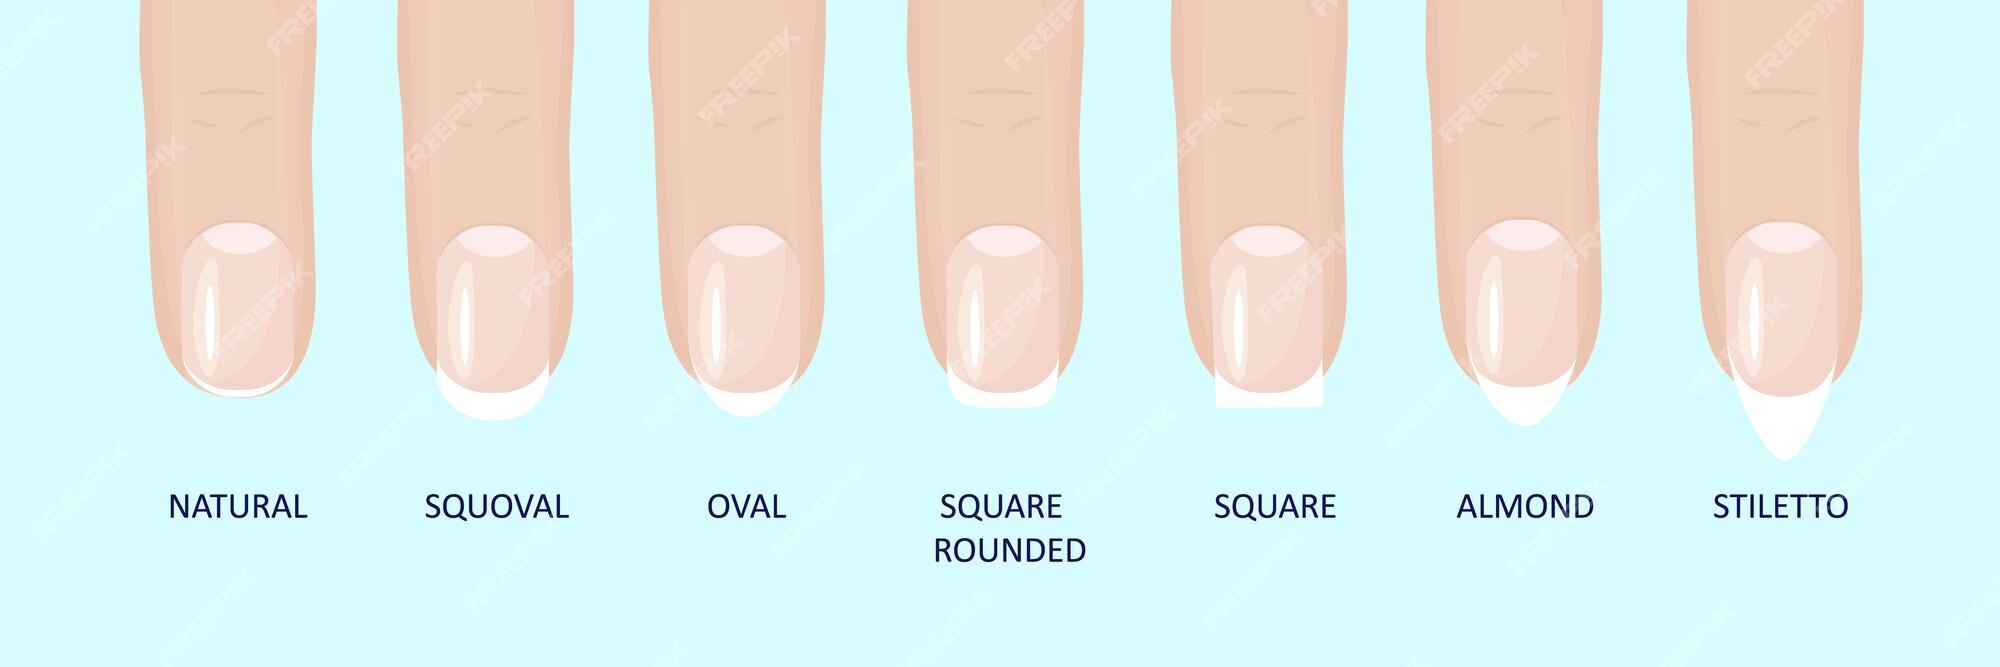 Premium Vector | Manicure most popular fashion nail shapes flat style  vector illustration set